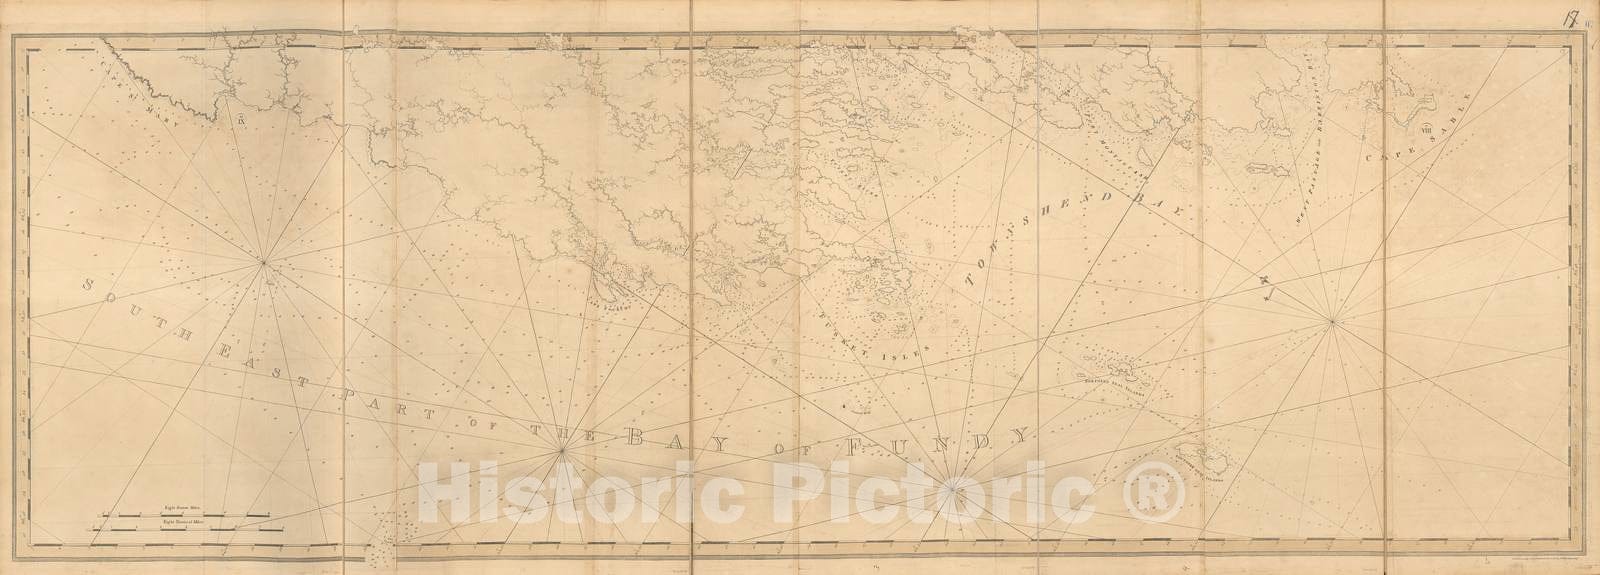 Historic 1800 Map - The Atlantic Neptune - Coast from Cape Sable to Cape St. Mary